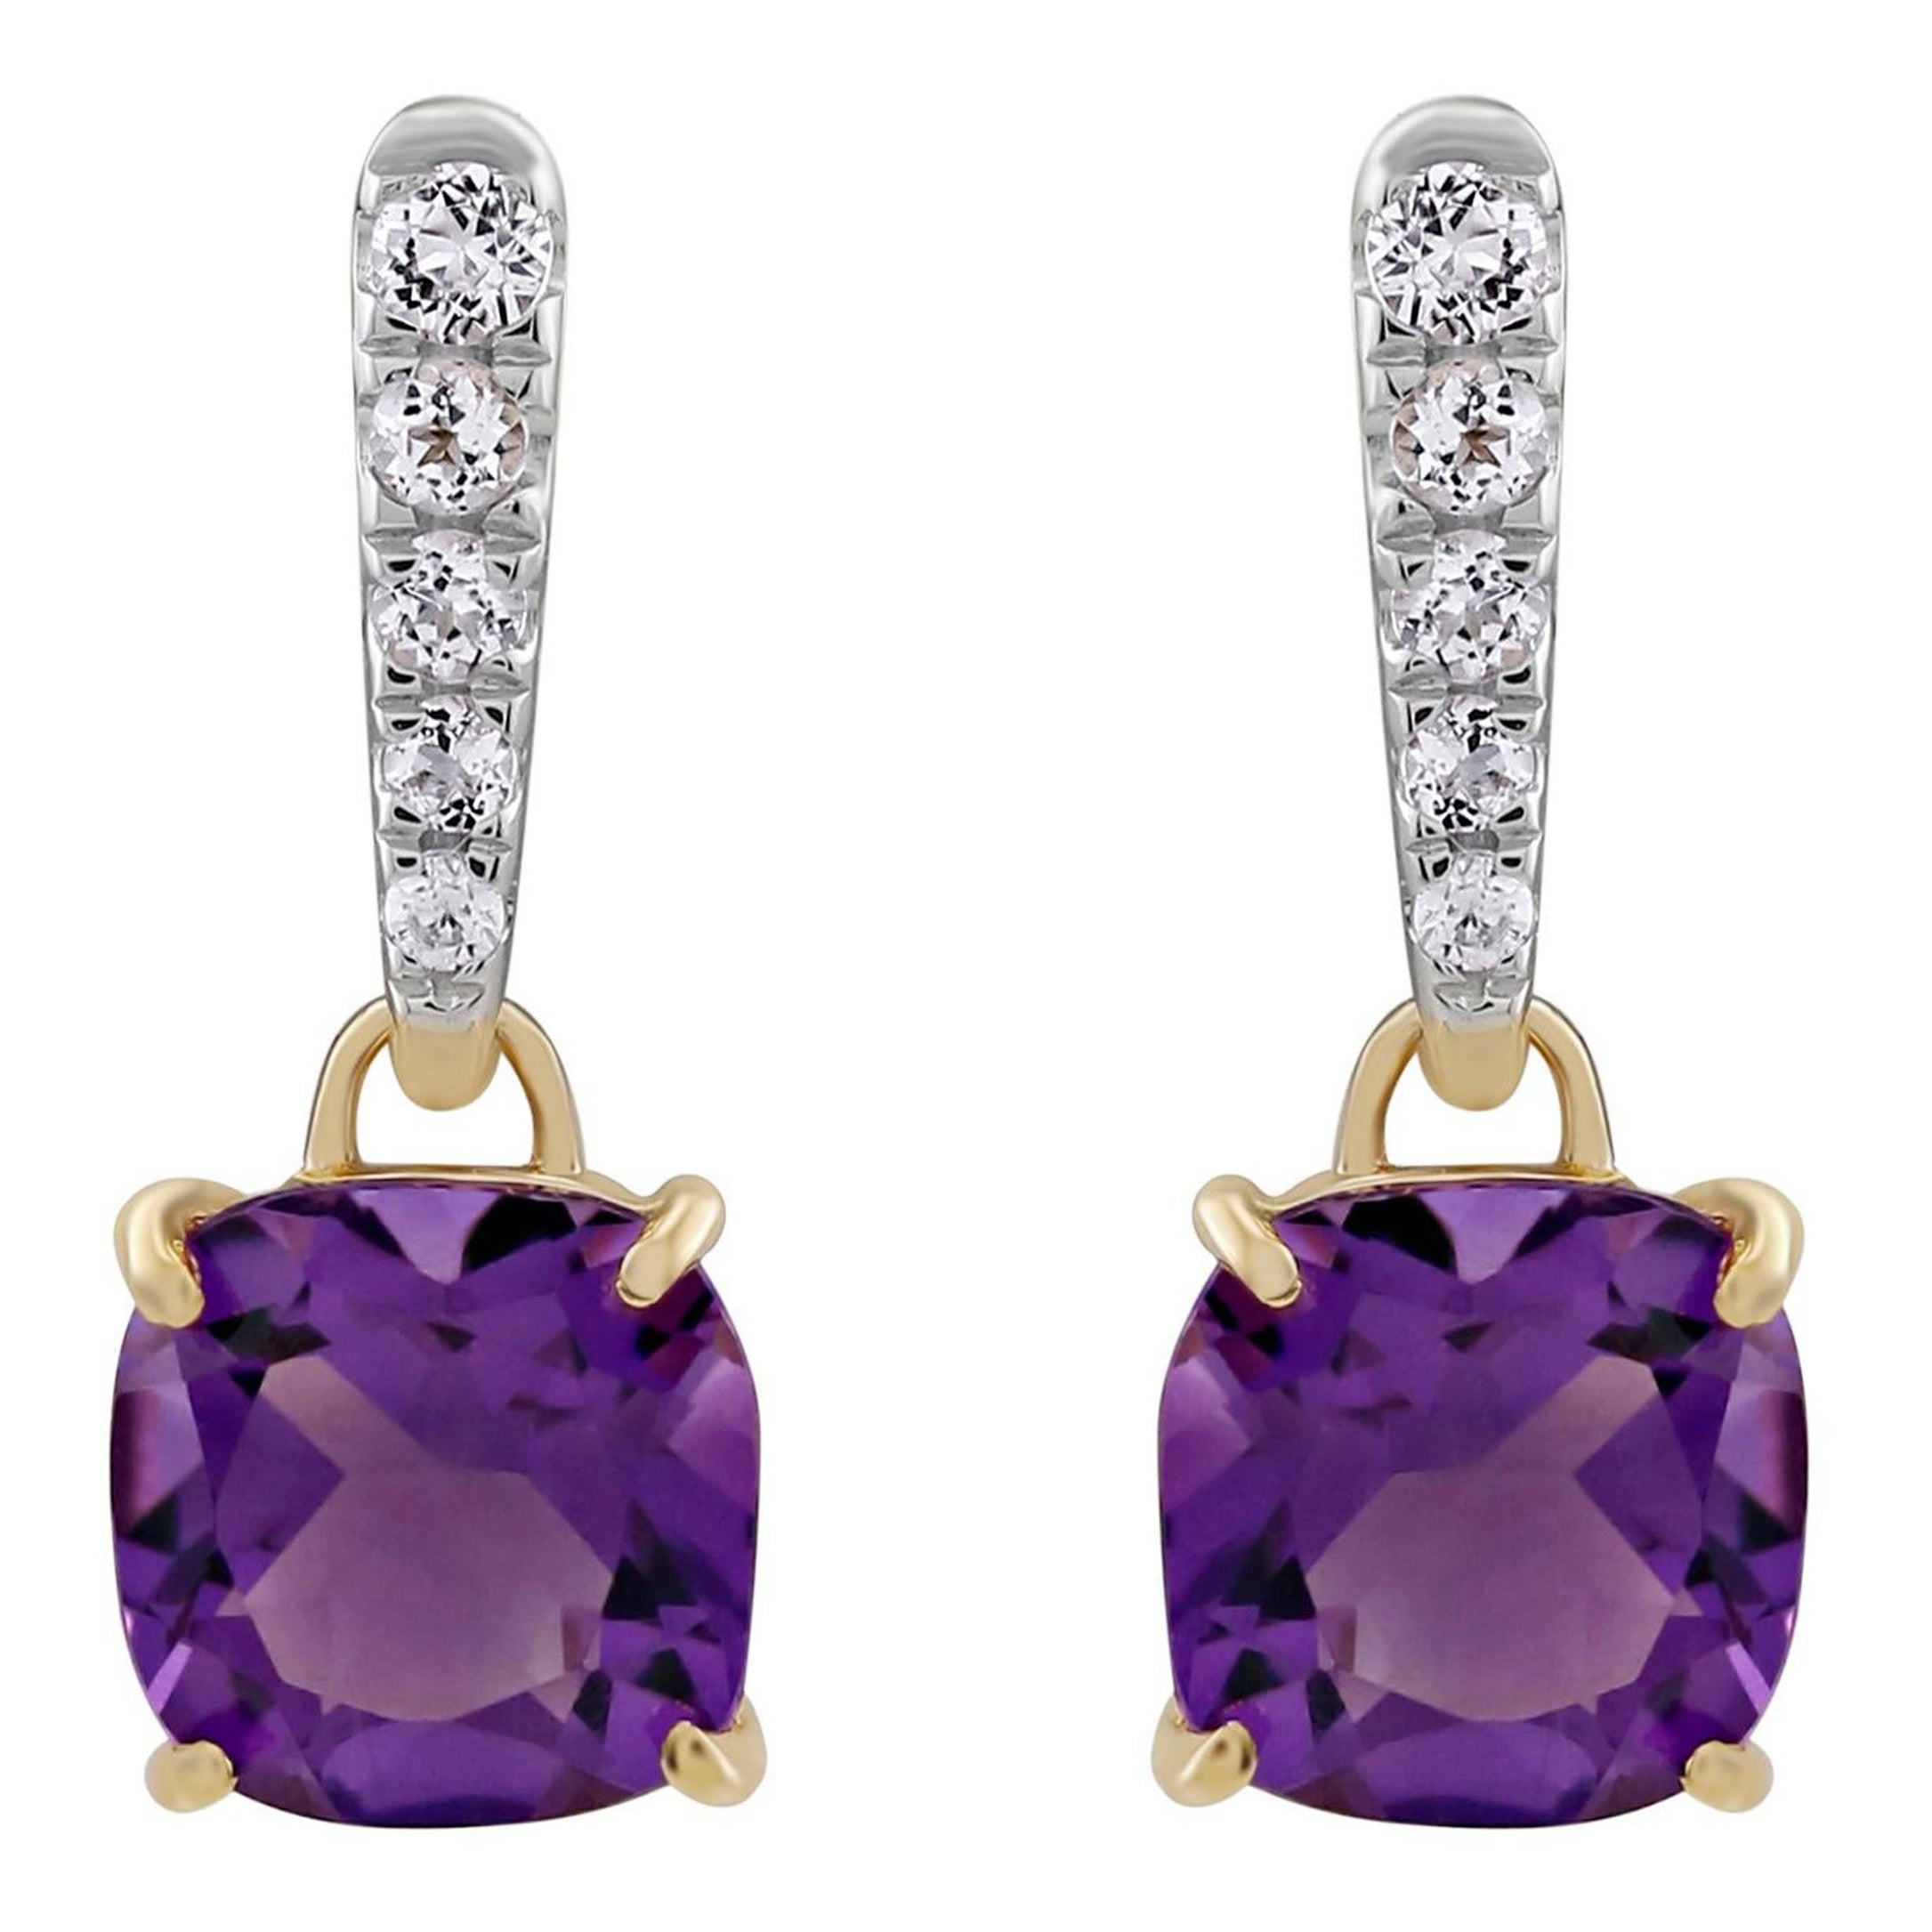 Gemistry 1.1 Cts. Cushion Amethyst and 0.16 Cts. Topaz Drop Earrings in 14K Gold